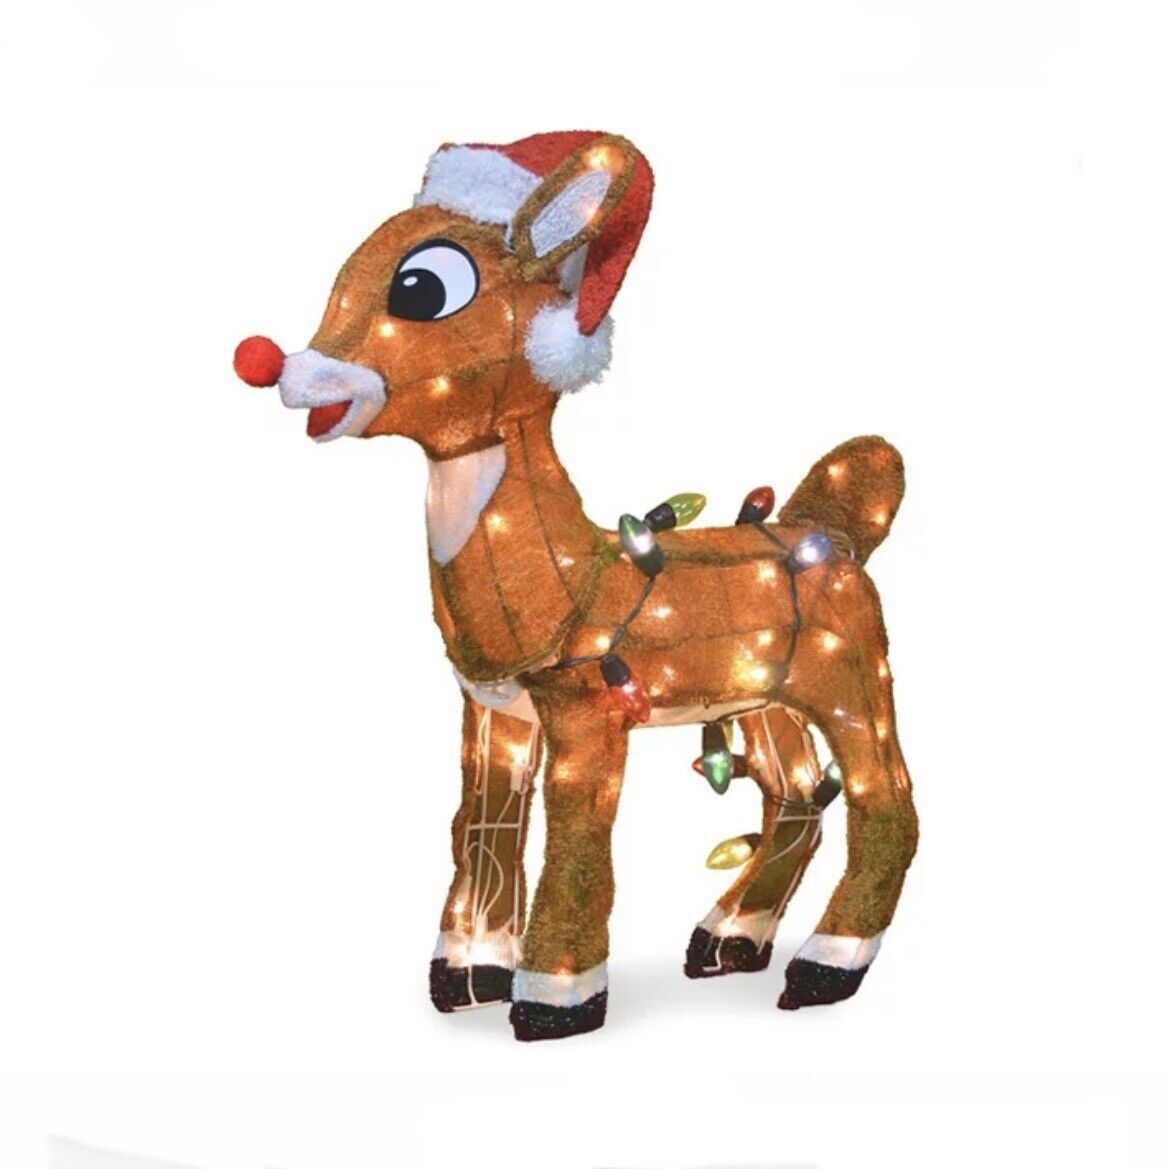 24in Rudolph the Red Nosed Reindeer Yard Art Pre Lit Outdoor Christmas Decor NEW